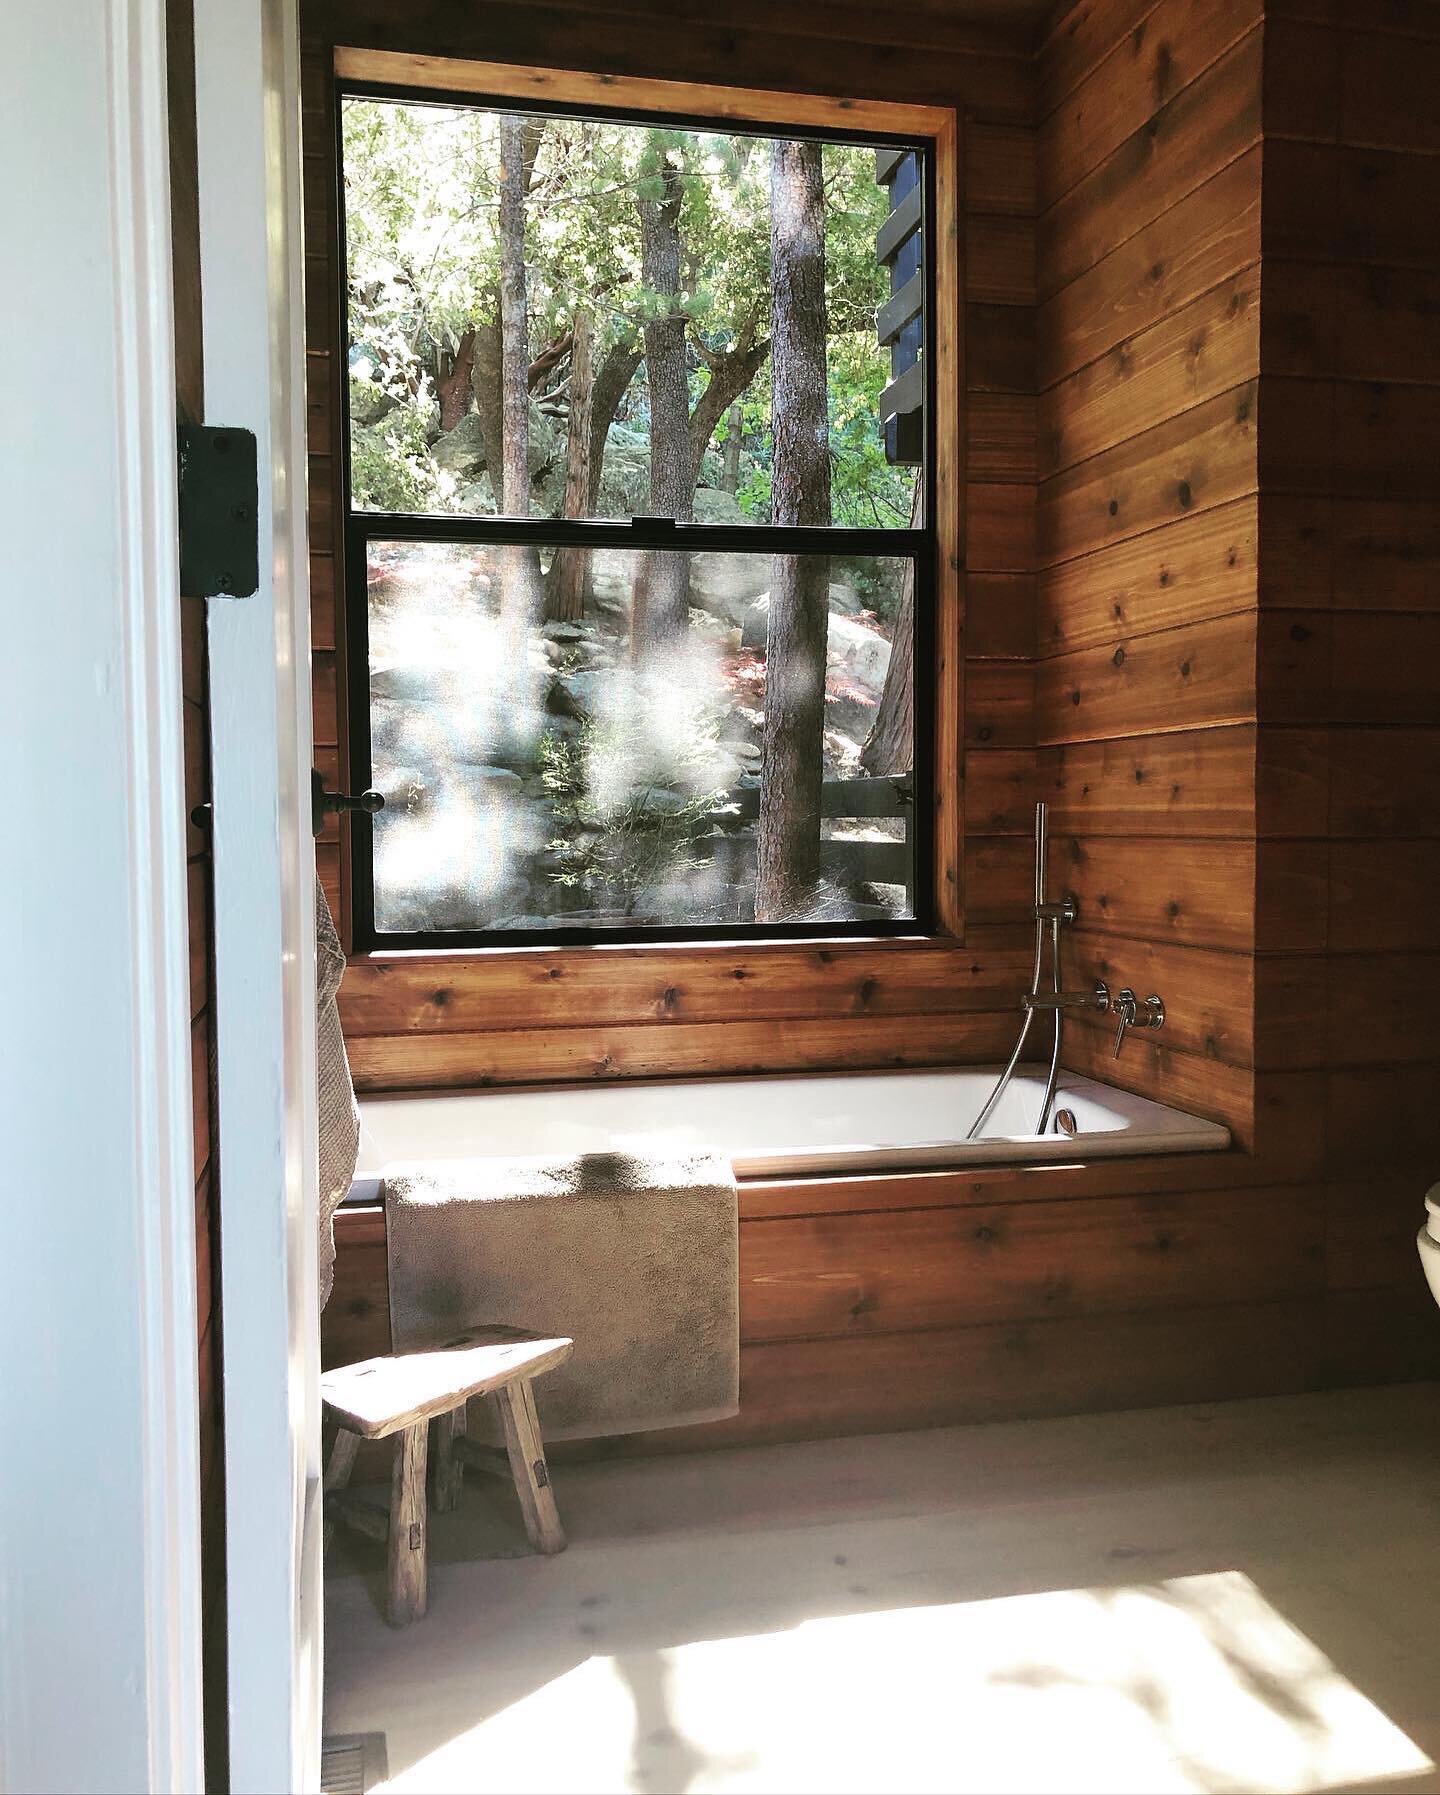 A welcoming light spilling in through the new window in the transformed bathing room at the @cougarhouseidyllwild . Such a treat to relax here with the deer roaming outside, an occasional bobcat, cedar, quail, and so many other friends. 🦌

Thank you